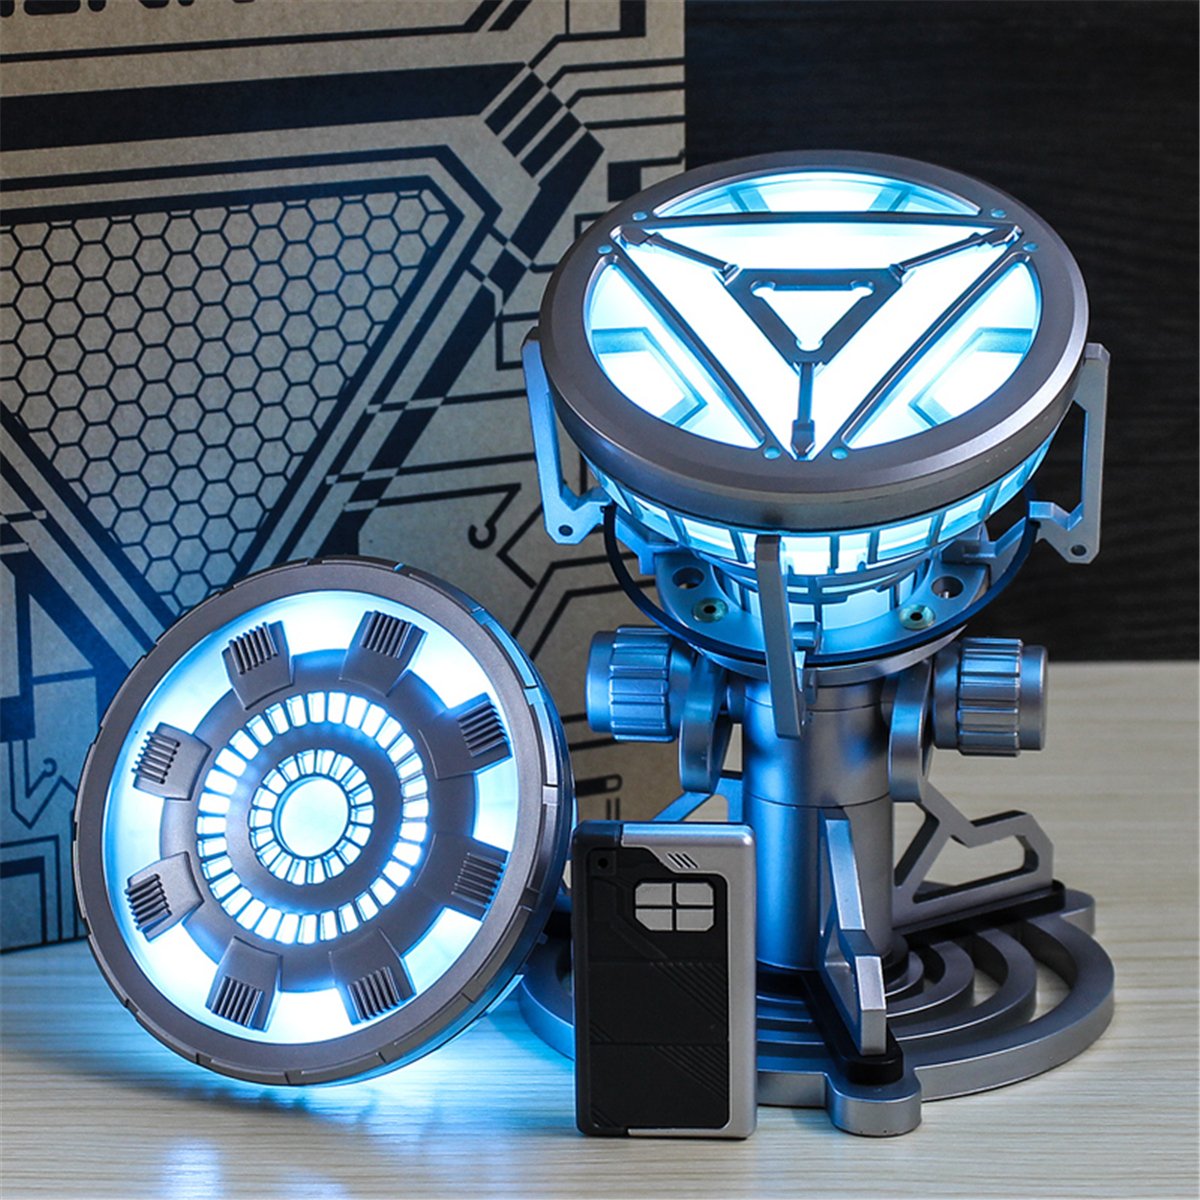 1:1 ARC REACTOR LED Chest Heart Light-up Lamp Movie ABC Props Model Kit Science Toy 2